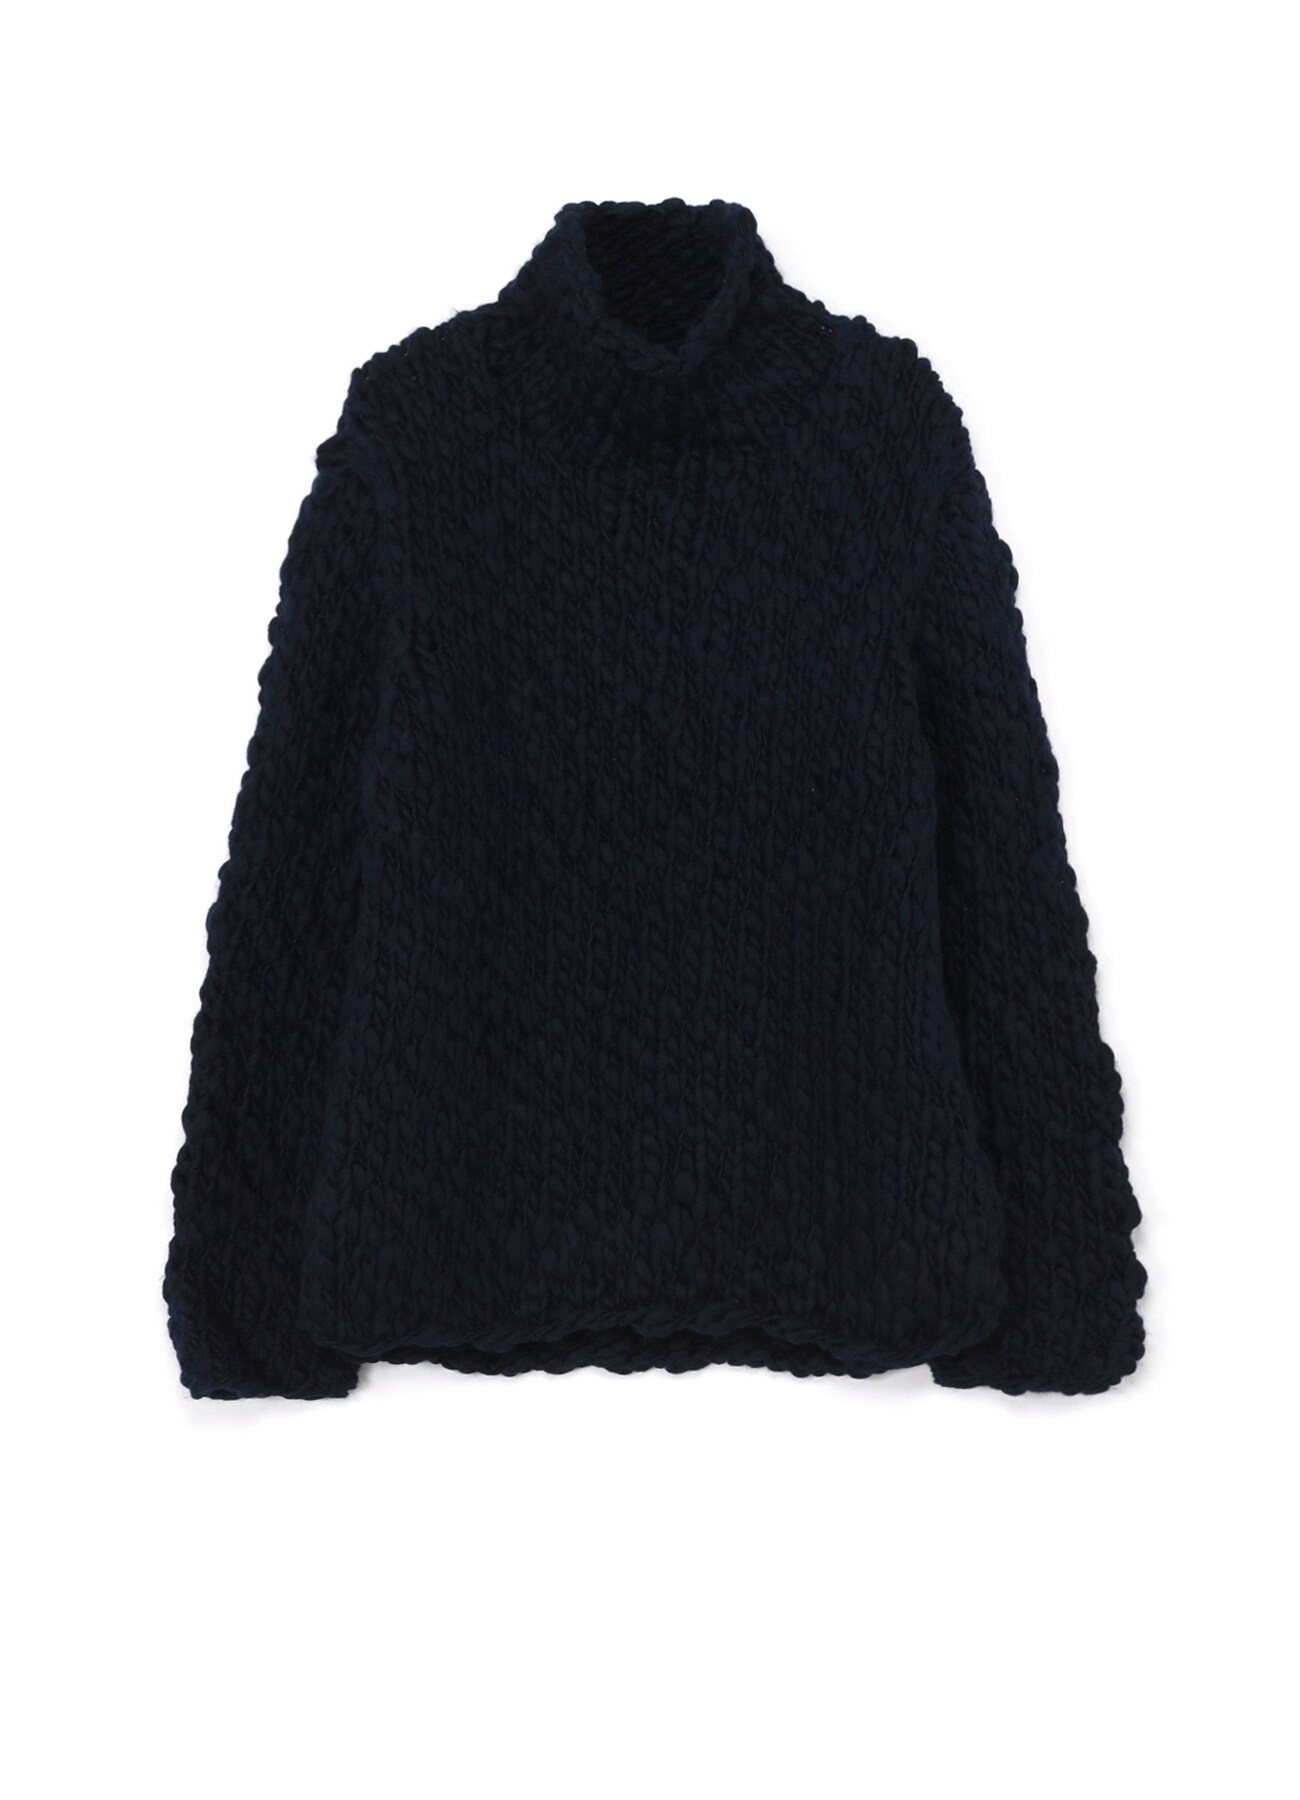 HAND-KNITTED PLAIN HAND KNIT TURTLE NECK(FREE SIZE Navy): Vintage 